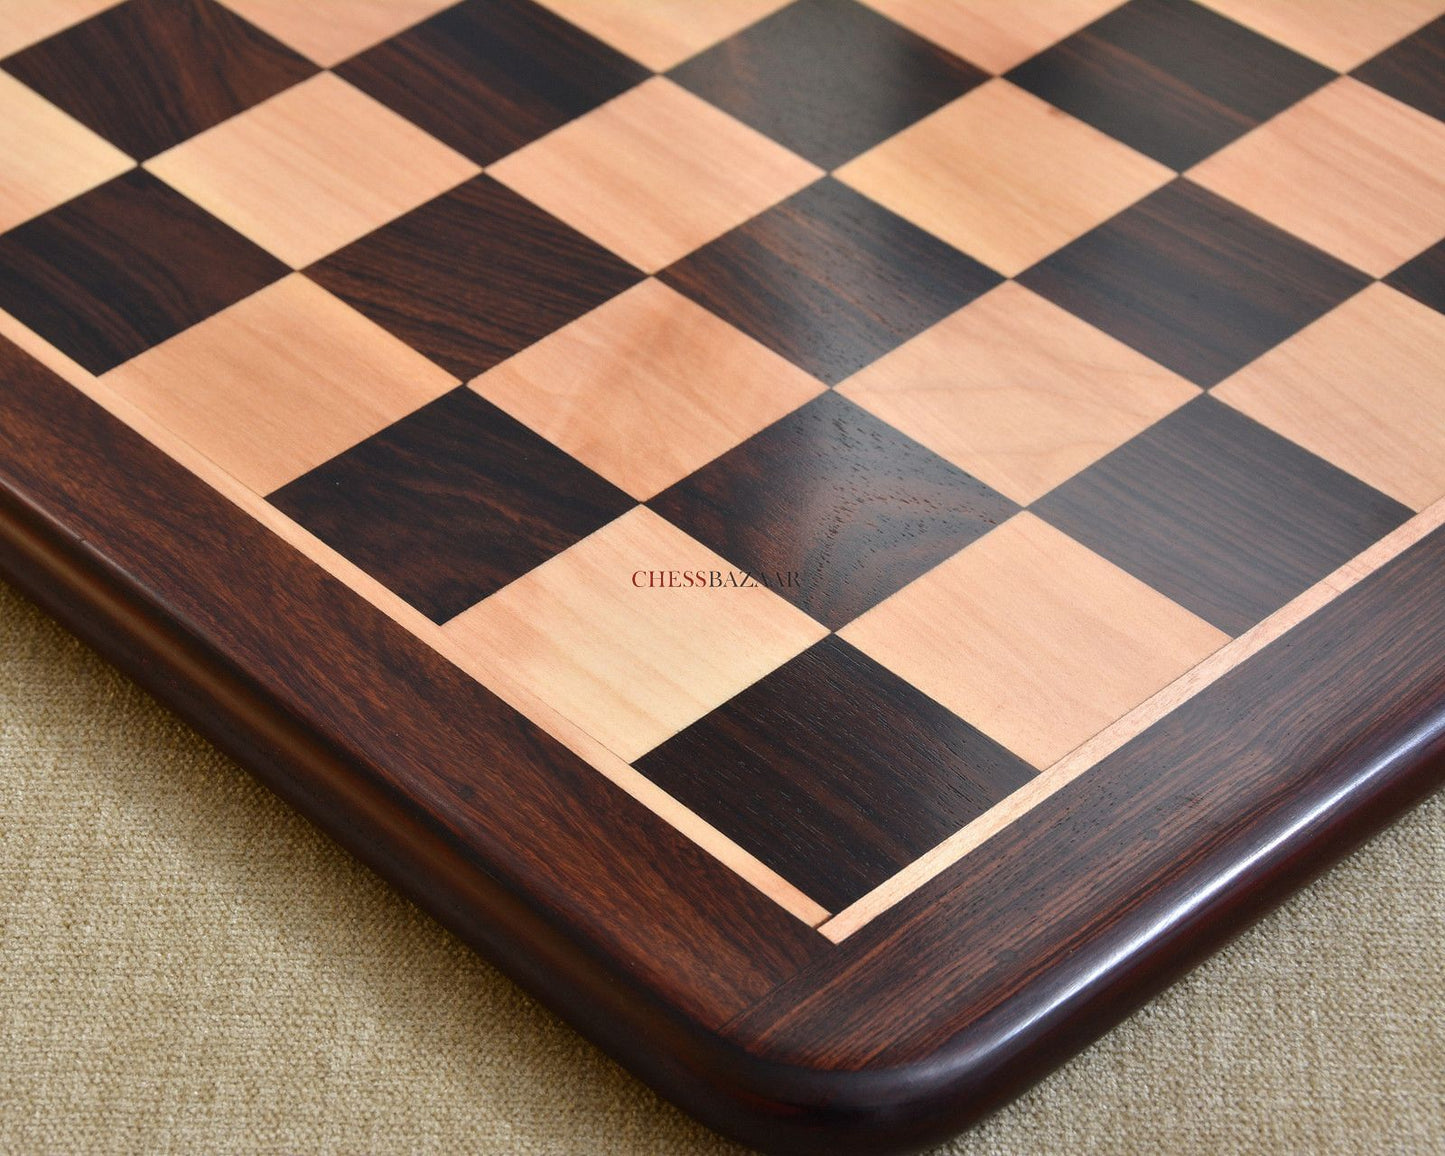 NEW Wooden Chess Board Dark Brown Rose Wood 17" - 45 mm